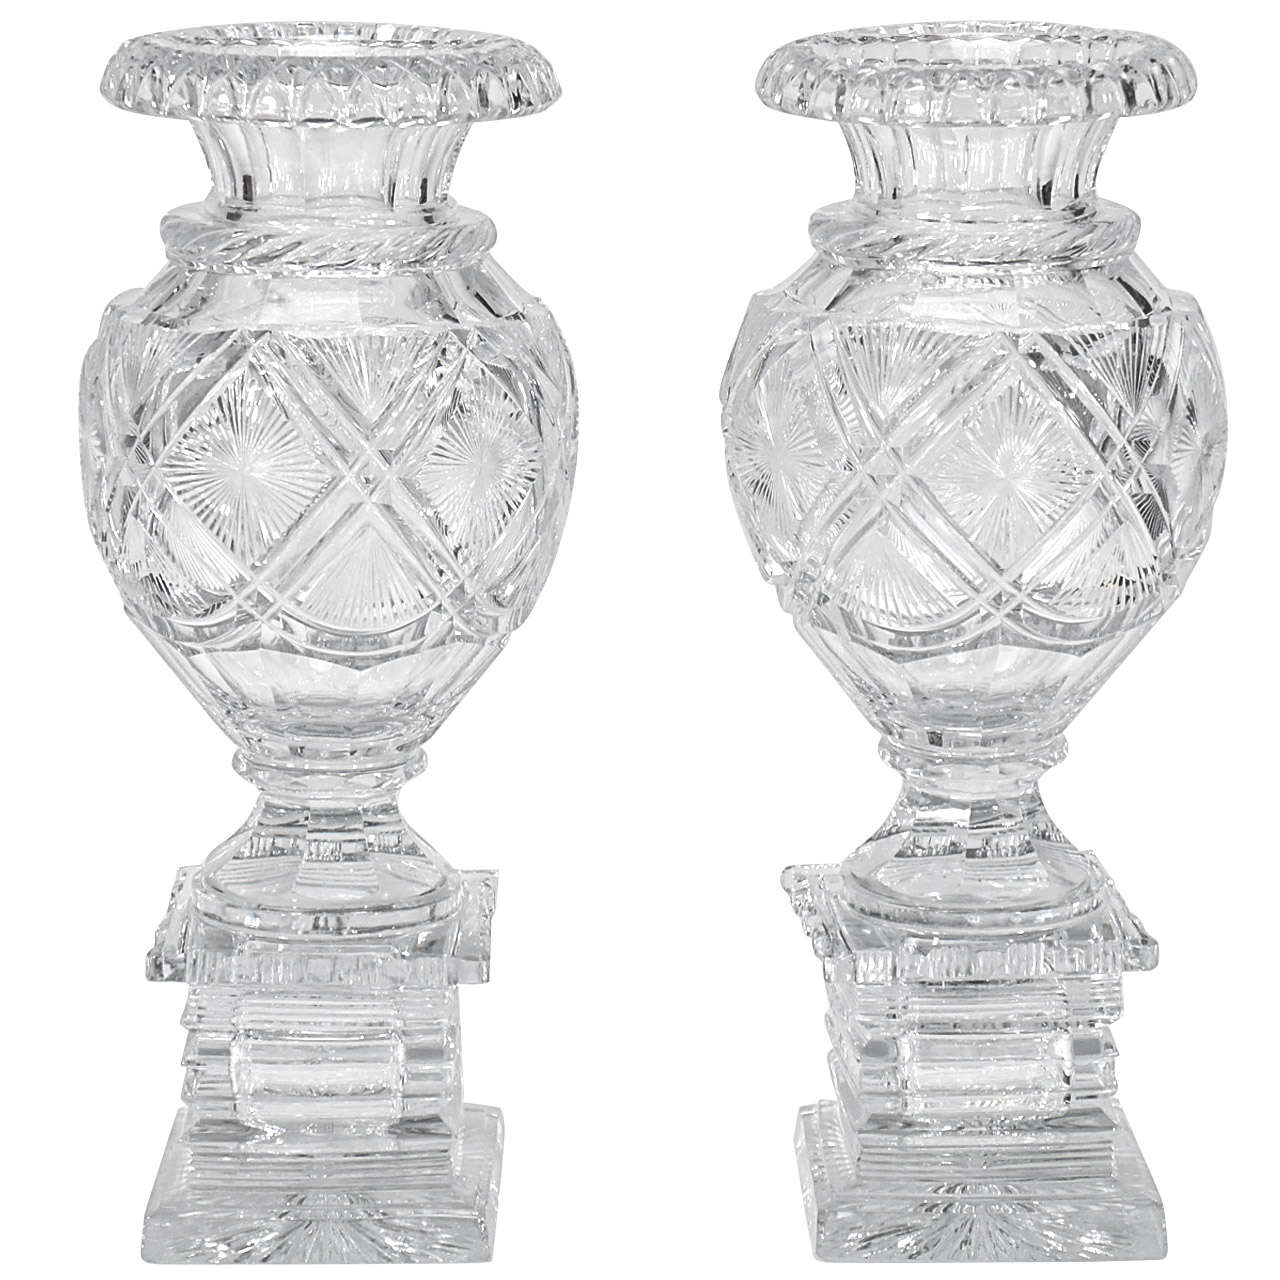 Pair of 19th C. Anglo-Irish Cut Crystal Mantle Vases W/ Square Bases